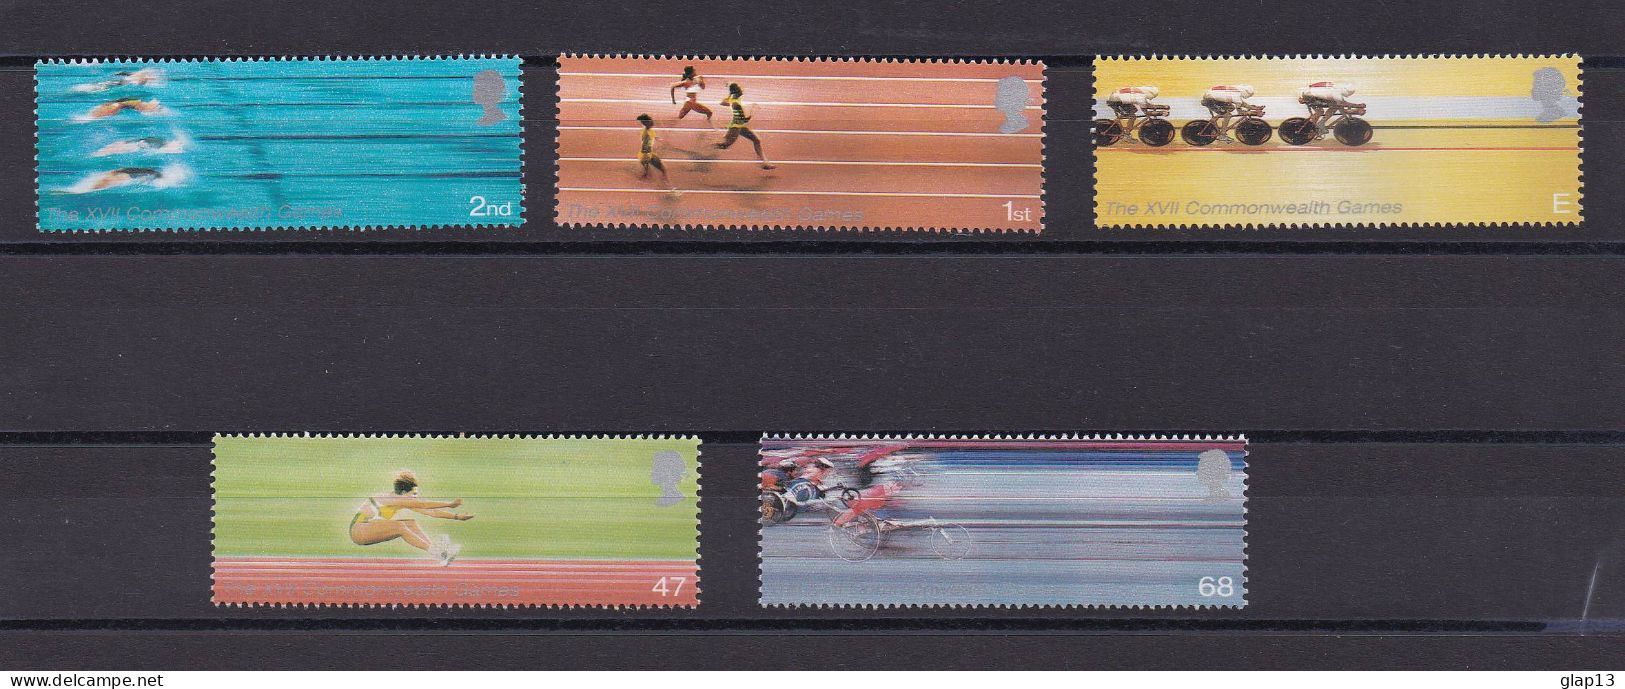 GRANDE-BRETAGNE 2002 TIMBRE N°2353/57 NEUF AVEC CHARNIERE SPORTS - Unused Stamps